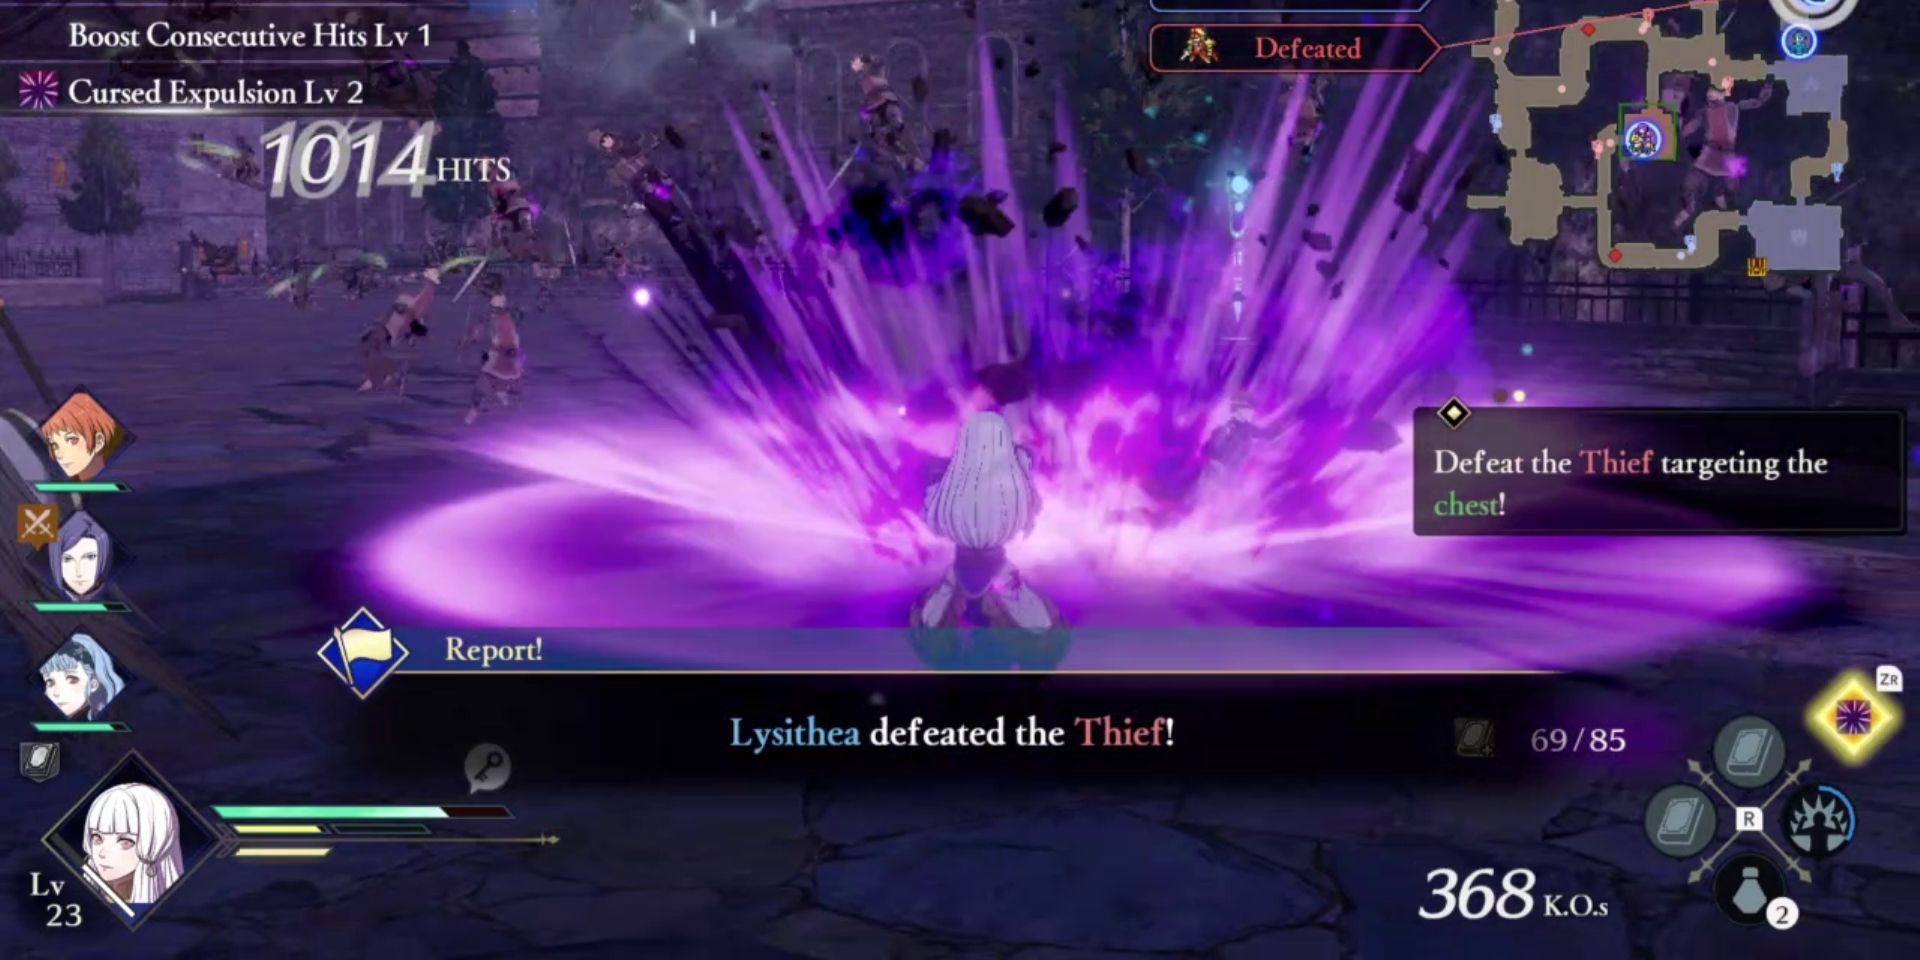 a white haired girl creates a large, purple blast directly in front of her. soldiers are flying in all directions. a mini map sits in the top right corner, an ability wheel in the bottom right, health meters for four different characters in the bottom left, and a hit count that reads "1014 hits" in the top left. Along the bottom are the words "Lysithea defeated the Thief!"